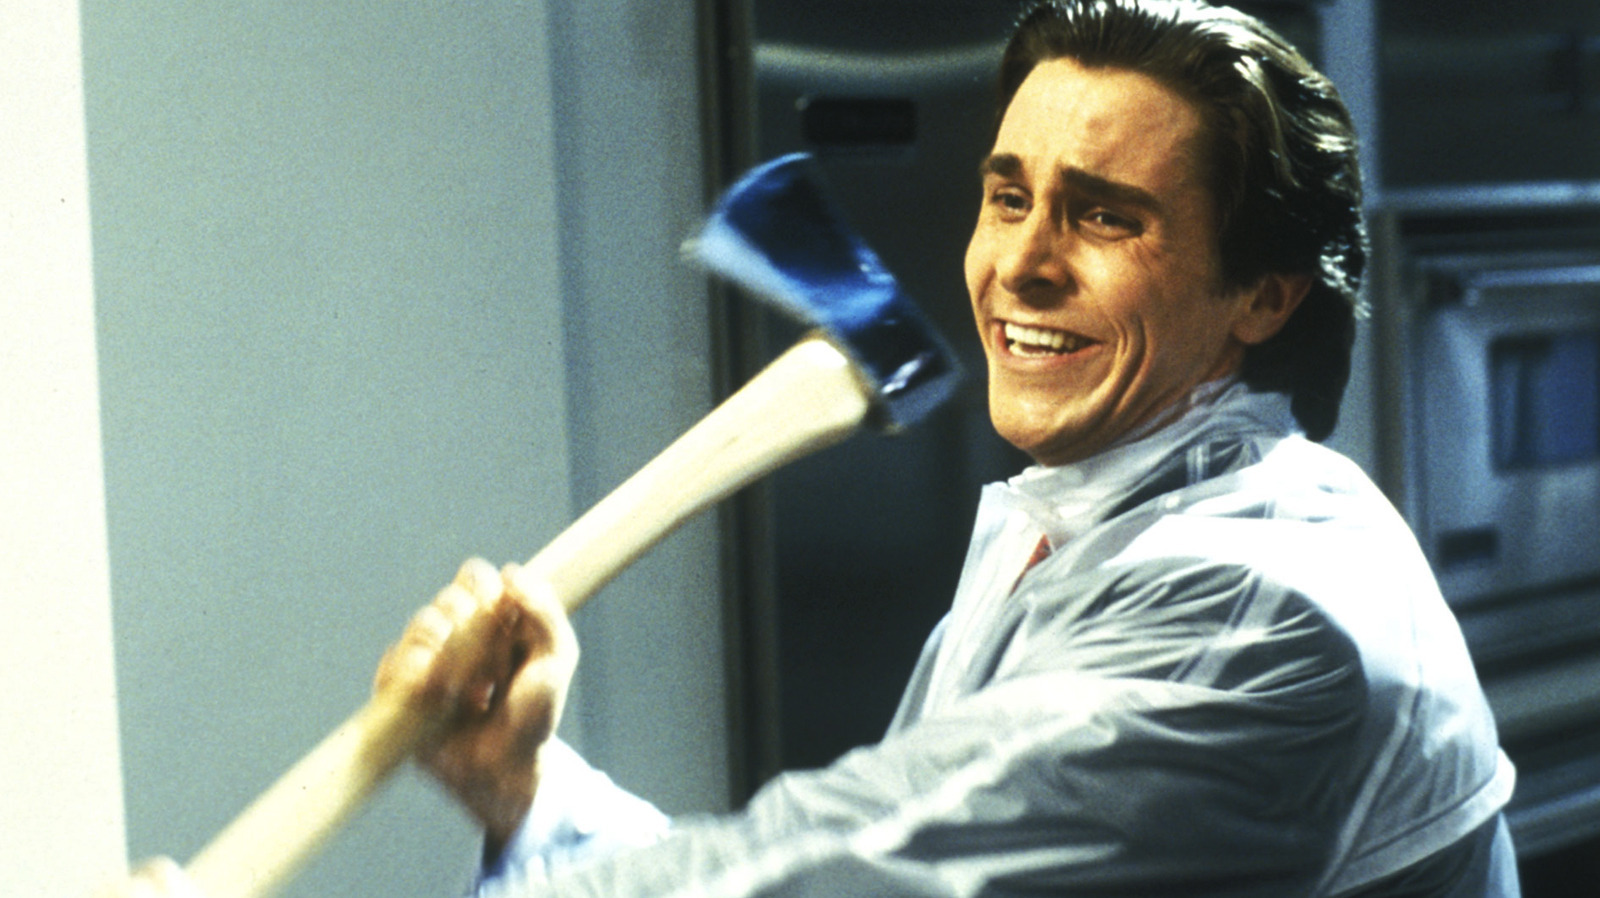 When Christian Bale Opened Up About His 'American Psycho' Co-Stars Who Felt  He Was 'Worst Actor They'd Ever Seen' During the Film's Shoot!